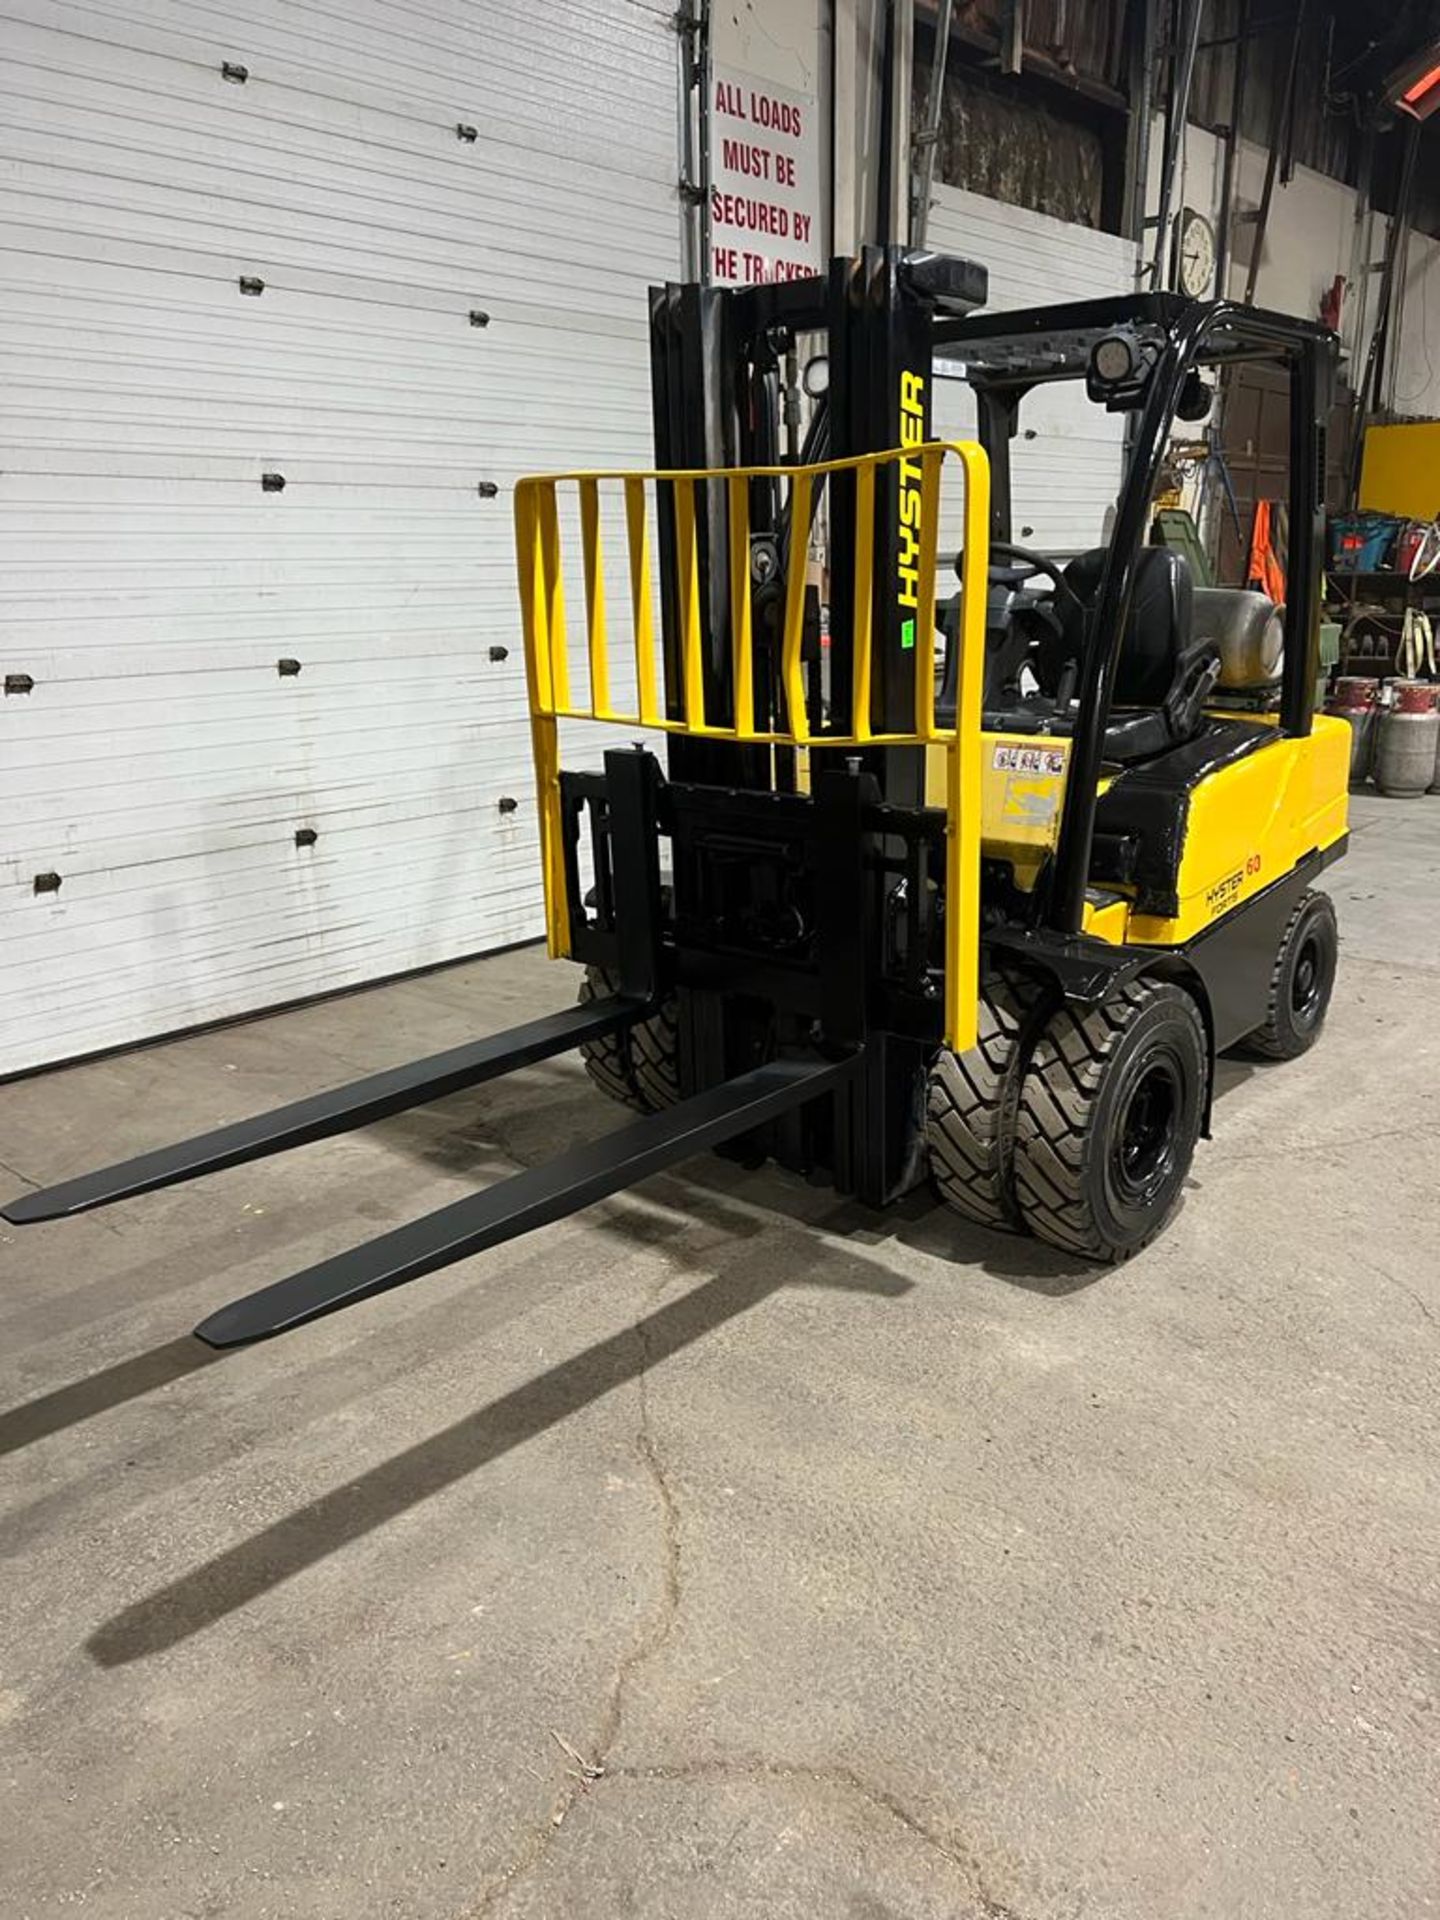 NICE 2011 Hyster 60 - 6,000lbs Capacity OUTDOOR Forklift DUAL FRONT TIRES LPG (propane) 60" forks - Image 3 of 5